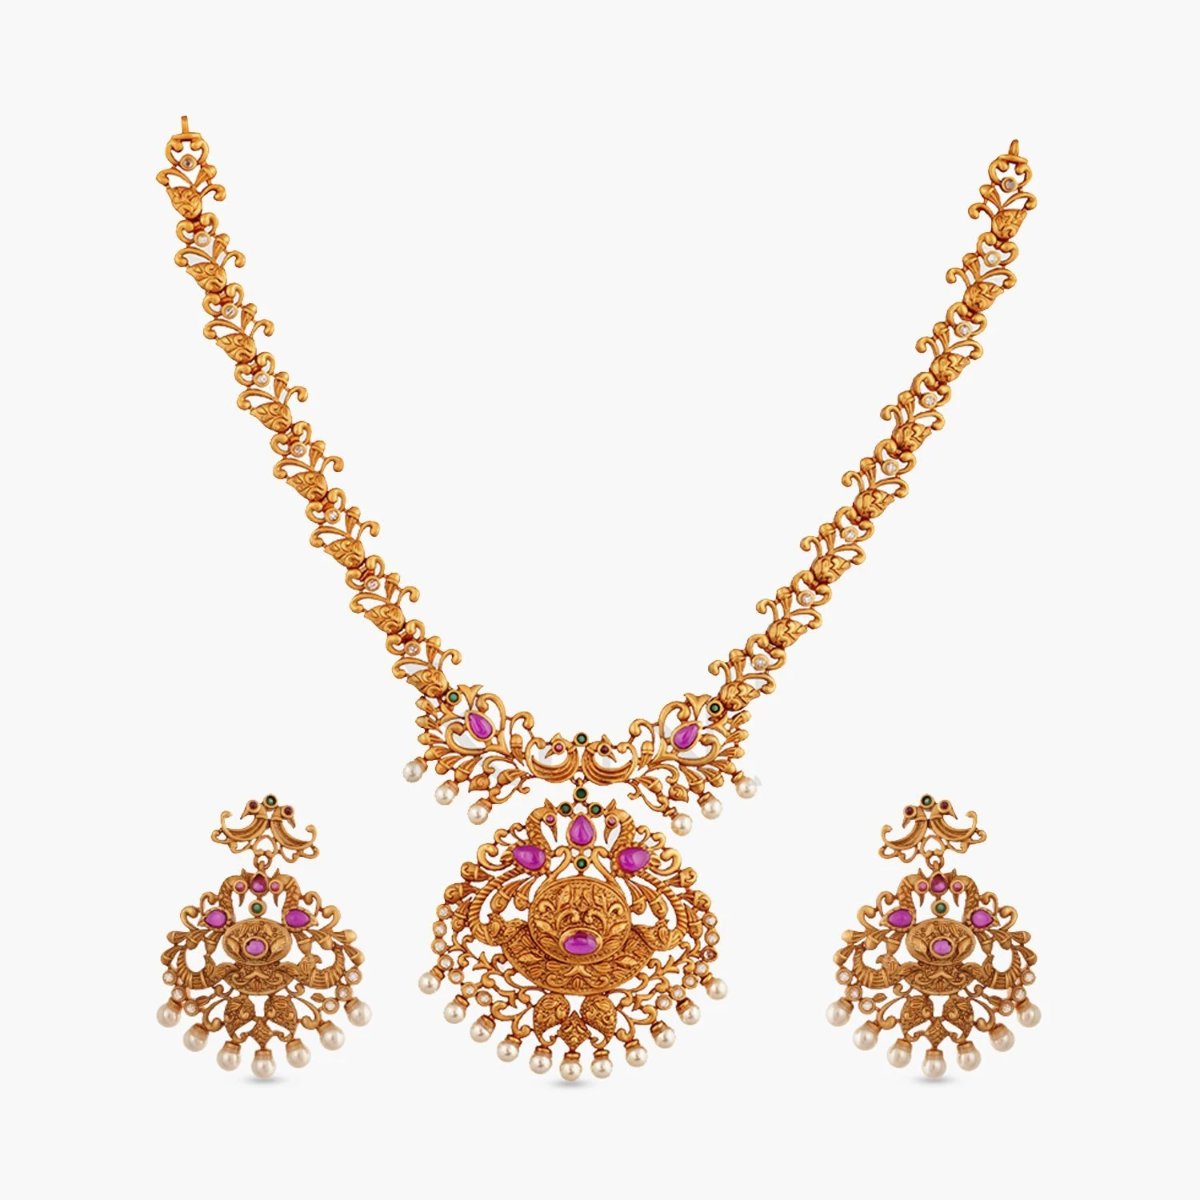 A picture of an Indian artificial gold plated necklace set with peacock motof pendant in red gemstones and pearls, with matching earrings.